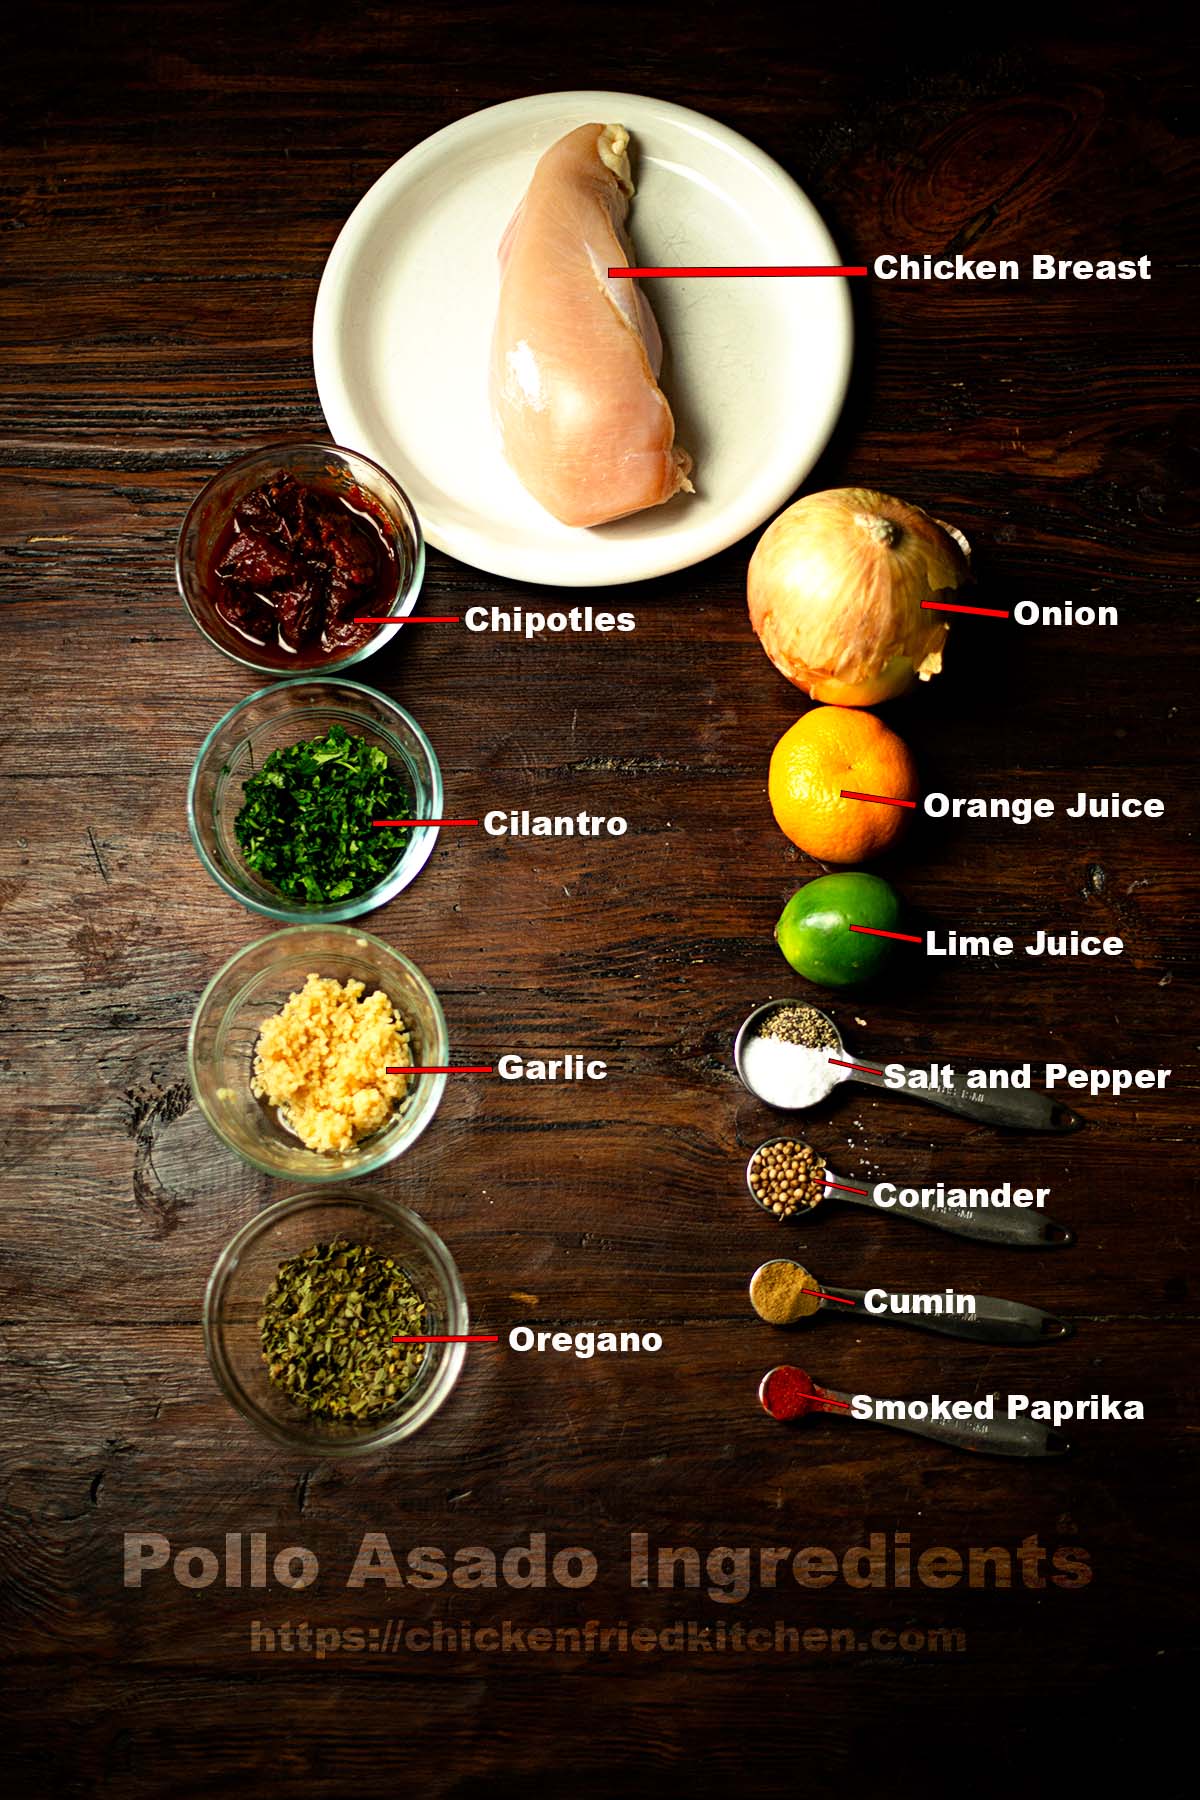 Pollo Asado ingredients pictured and listed.